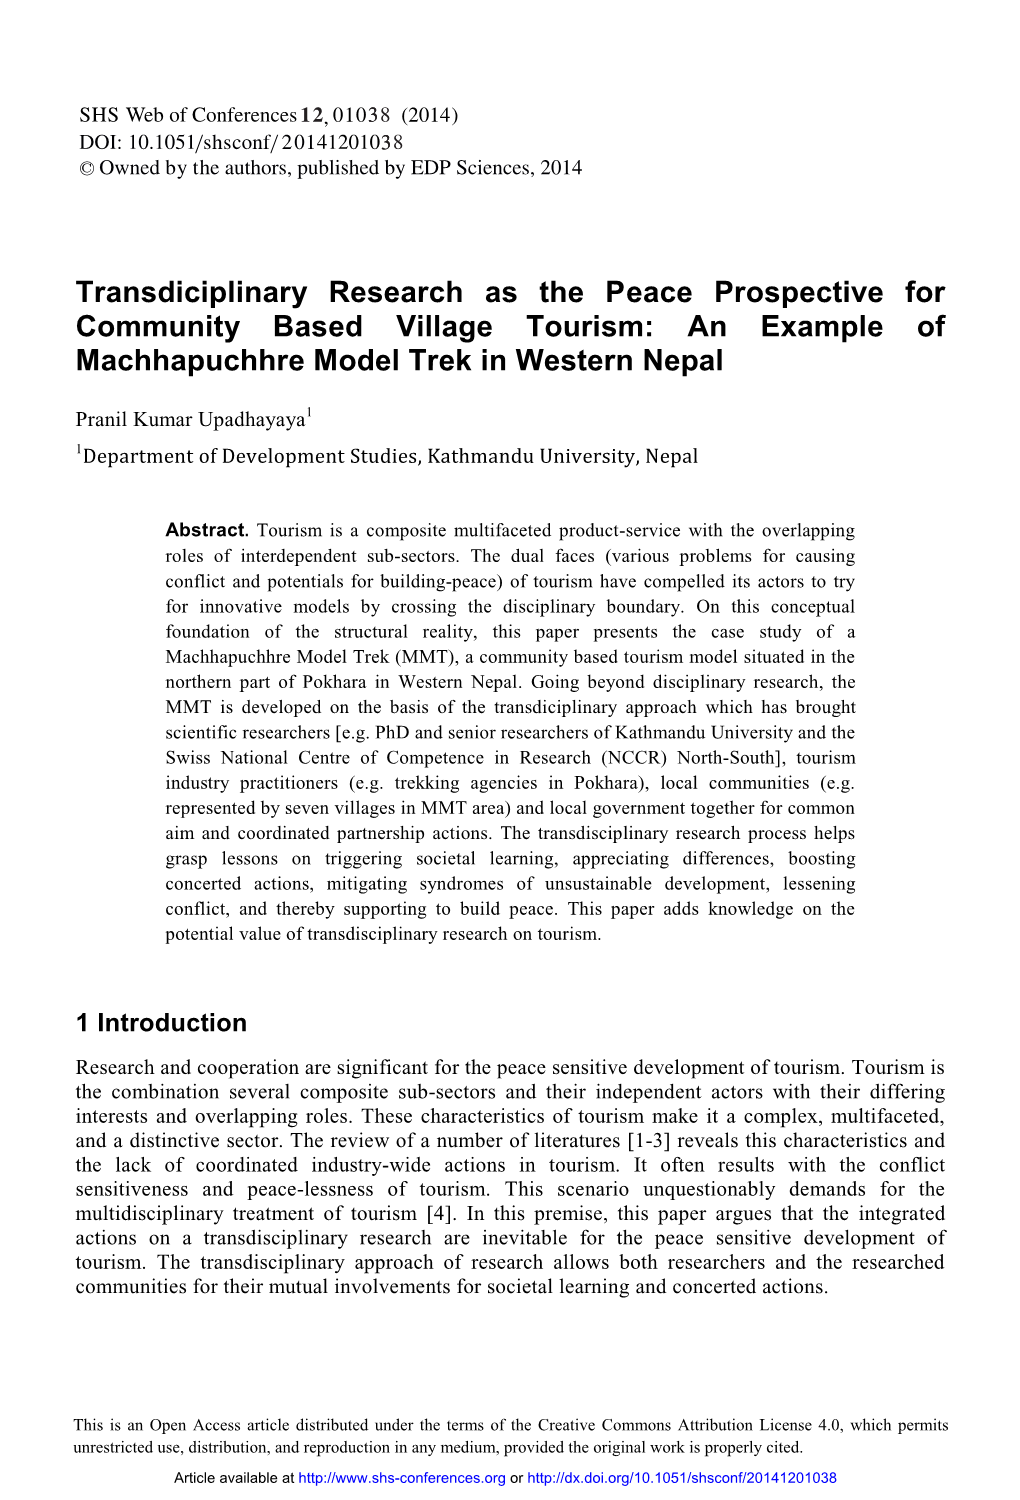 Transdiciplinary Research As the Peace Prospective for Community Based Village Tourism: an Example of Machhapuchhre Model Trek in Western Nepal